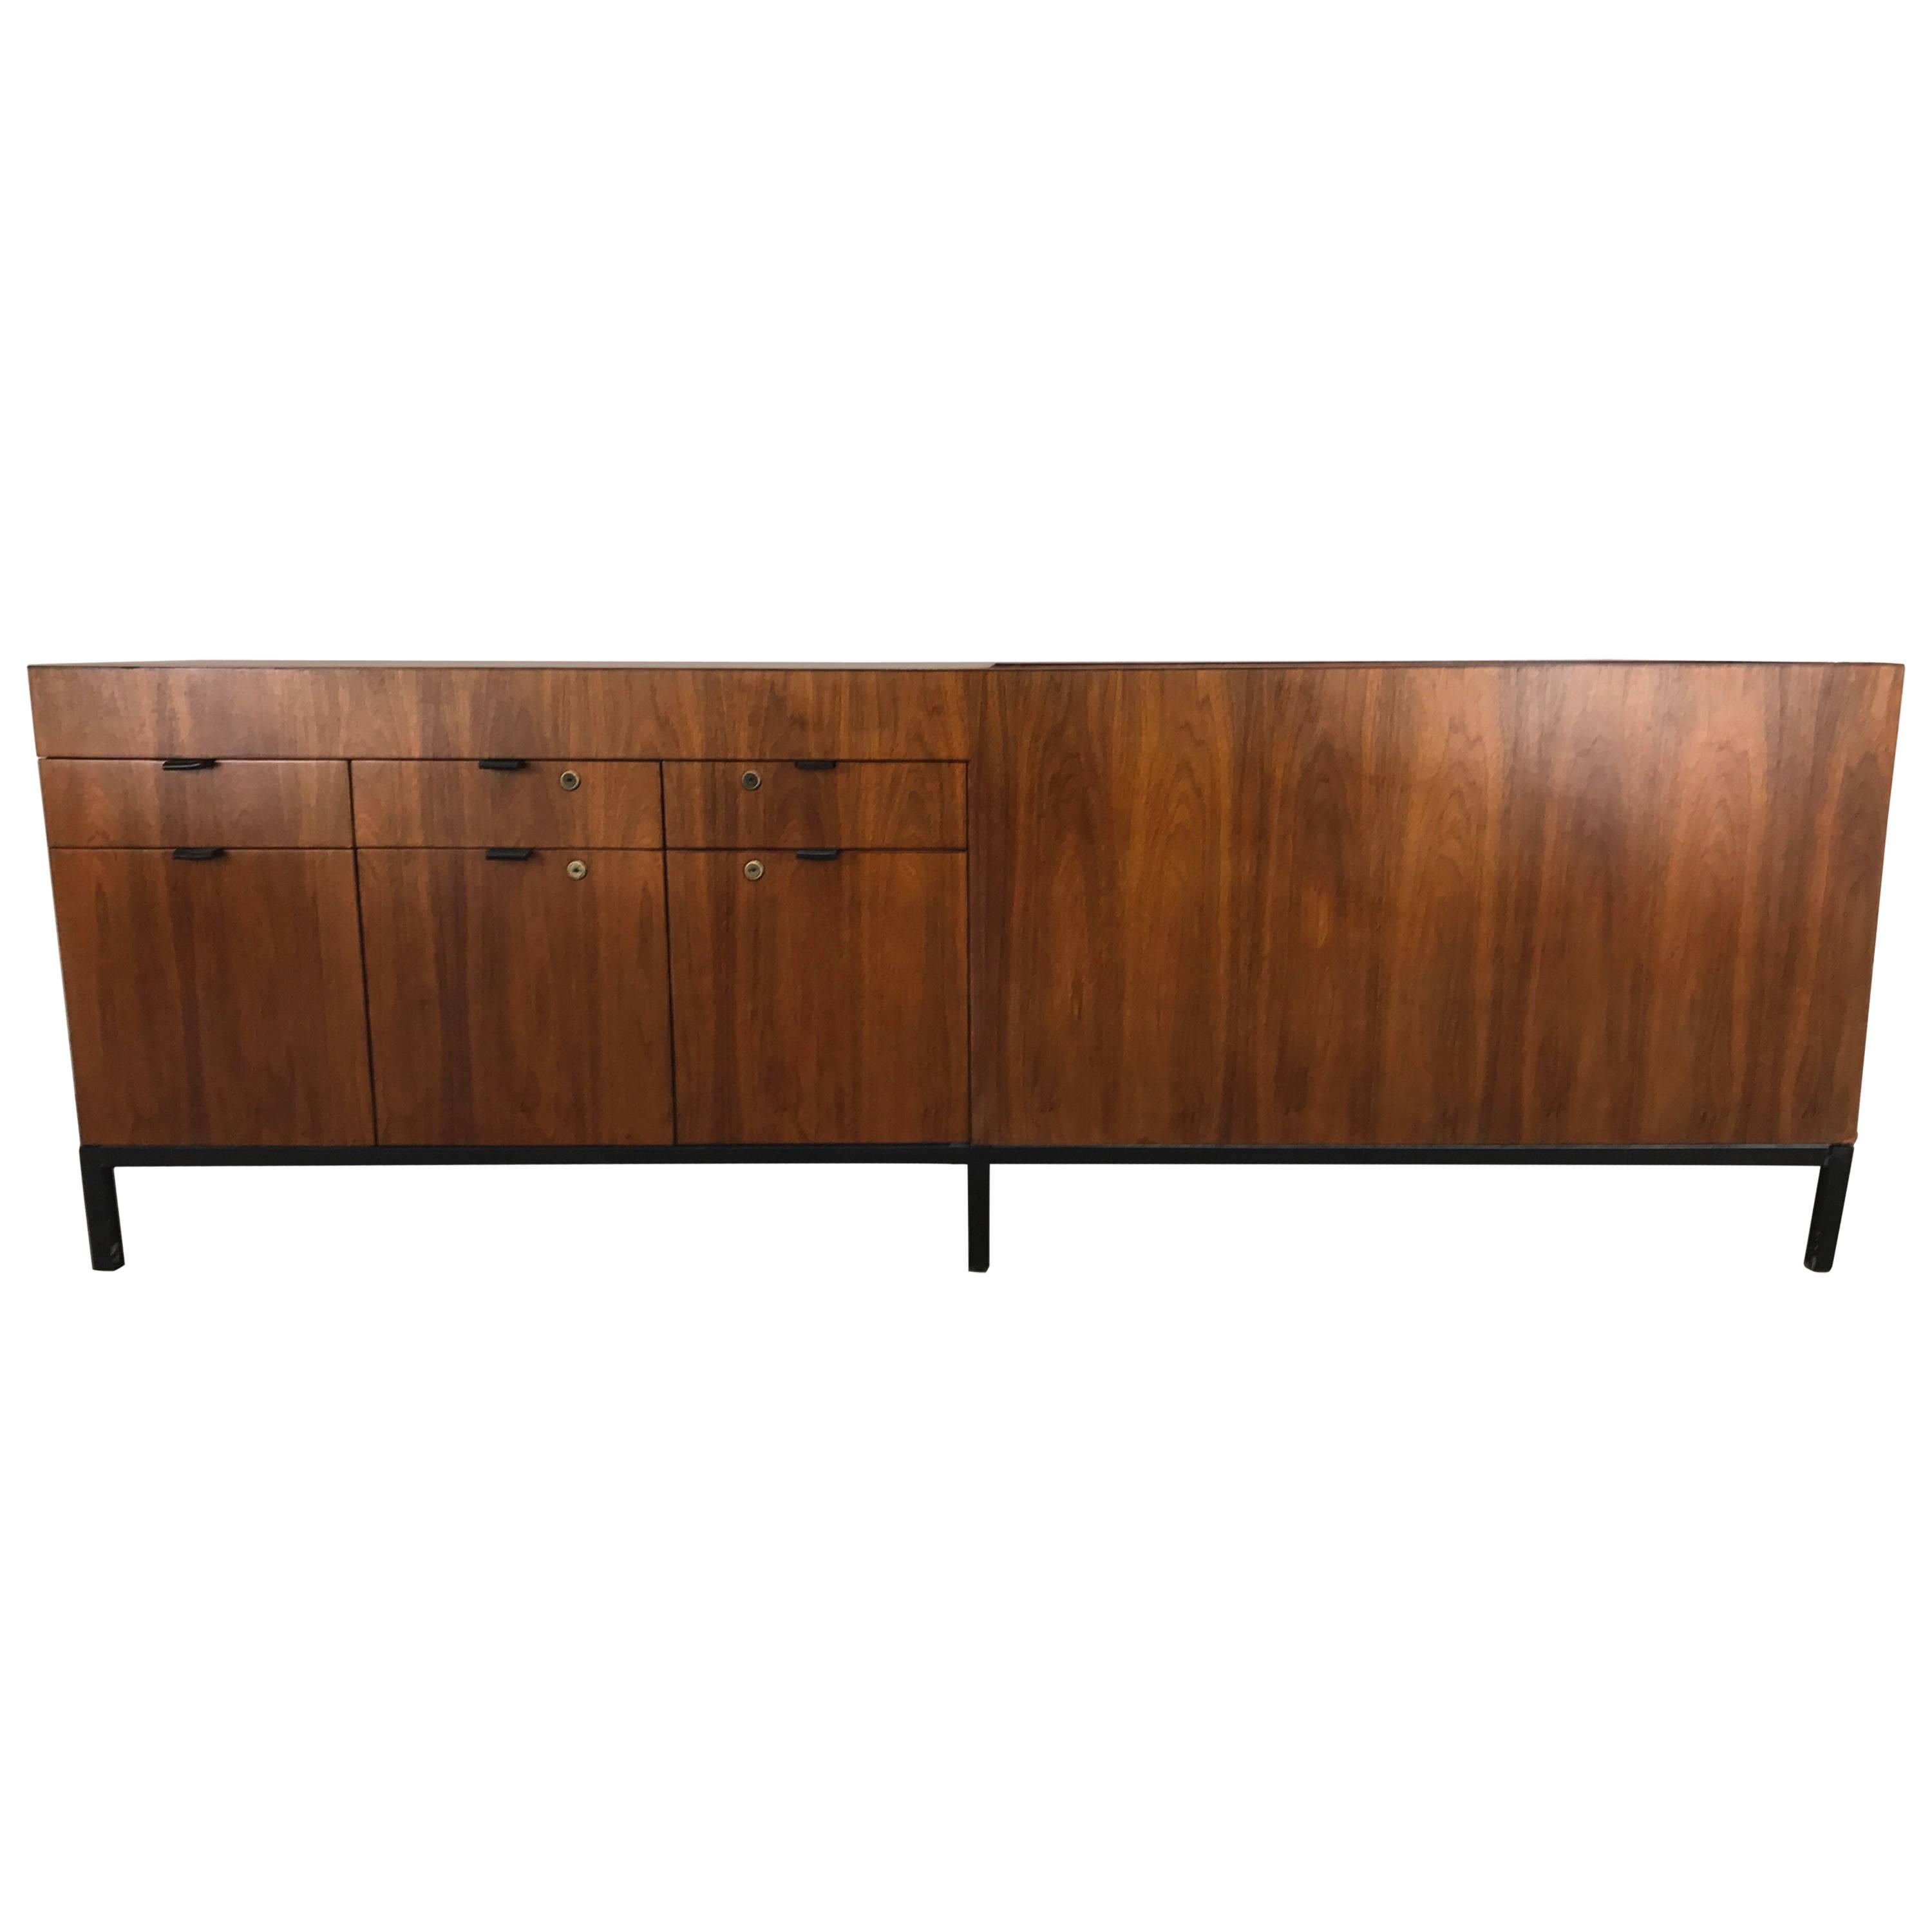 Unusual Modern Bookmatched Walnut Credenza, Leather Pulls by Stow and Davis